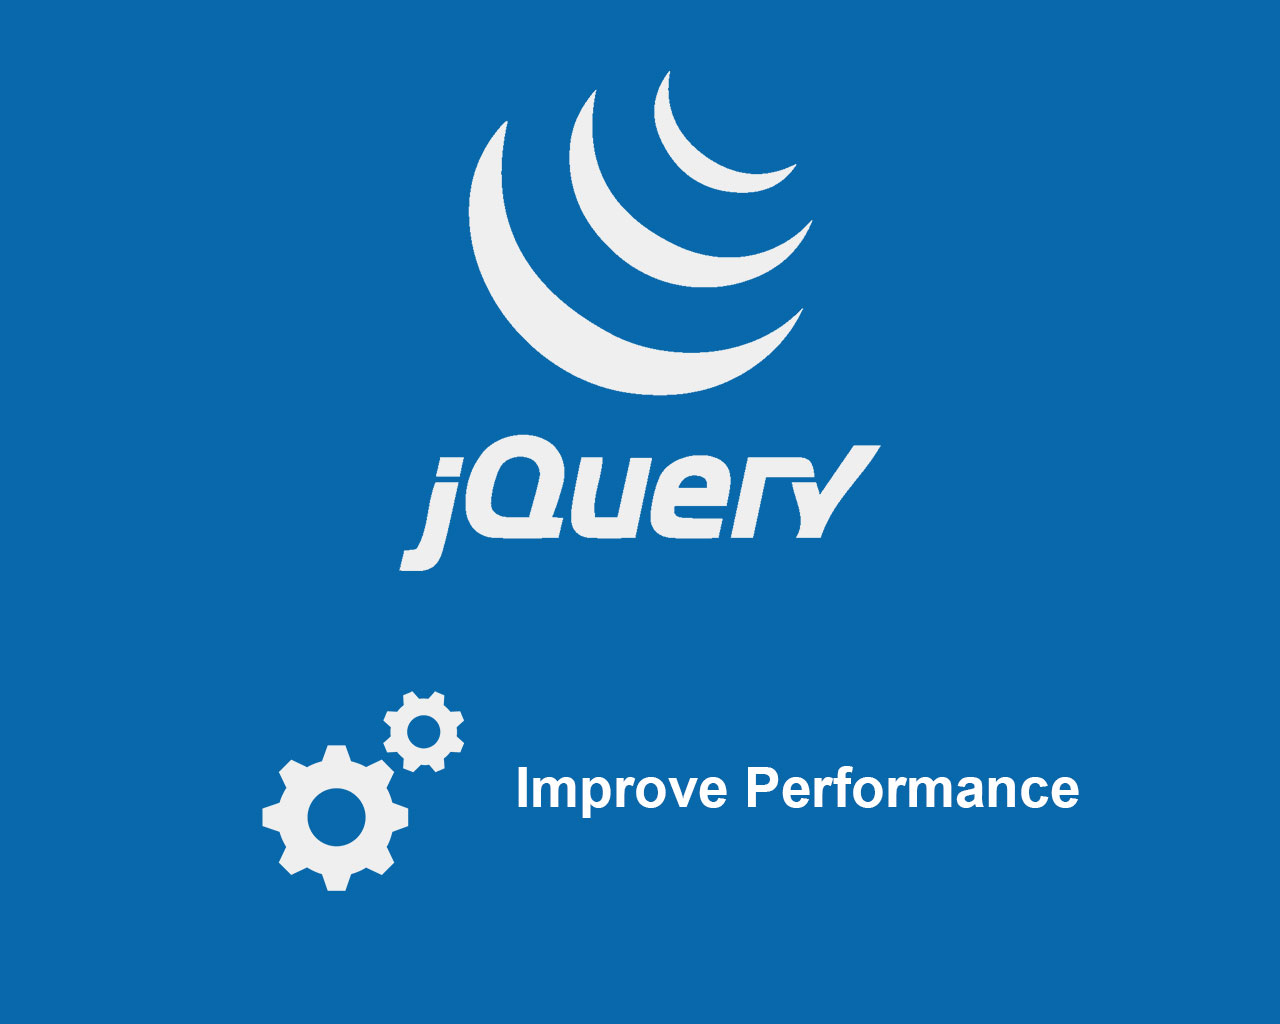 Tips to improve jQuery performance for websites